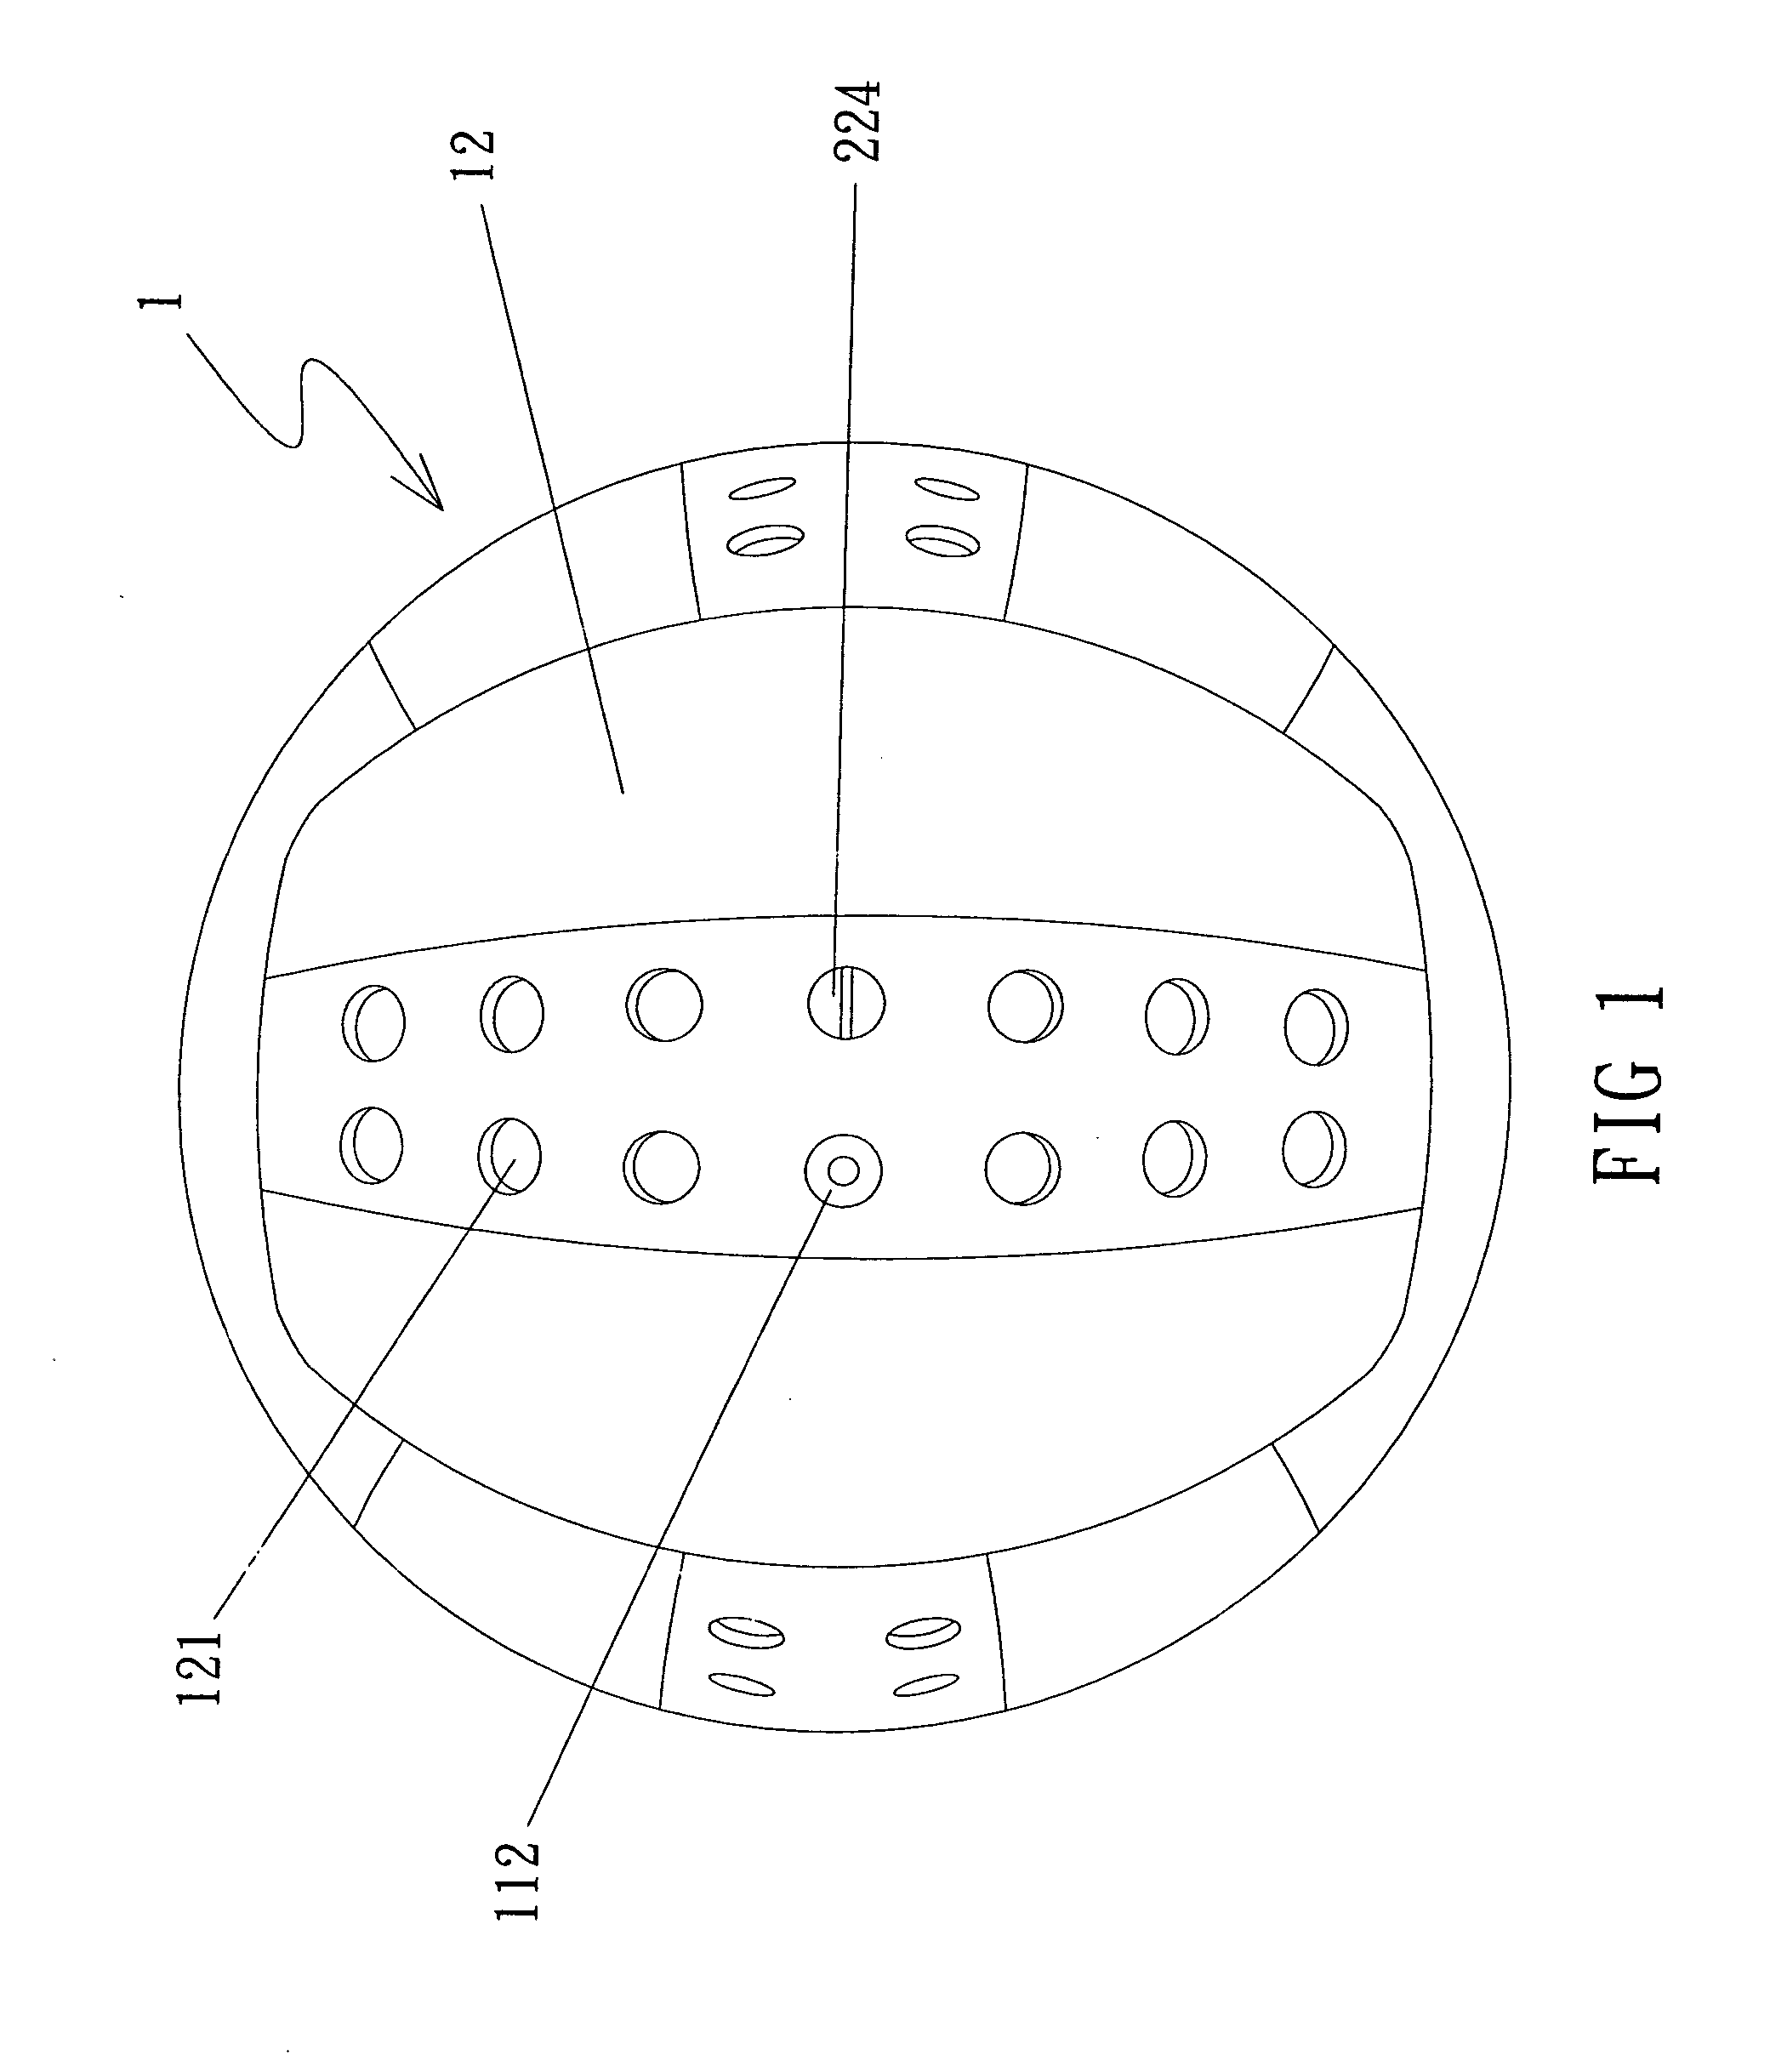 Ball with lighting device